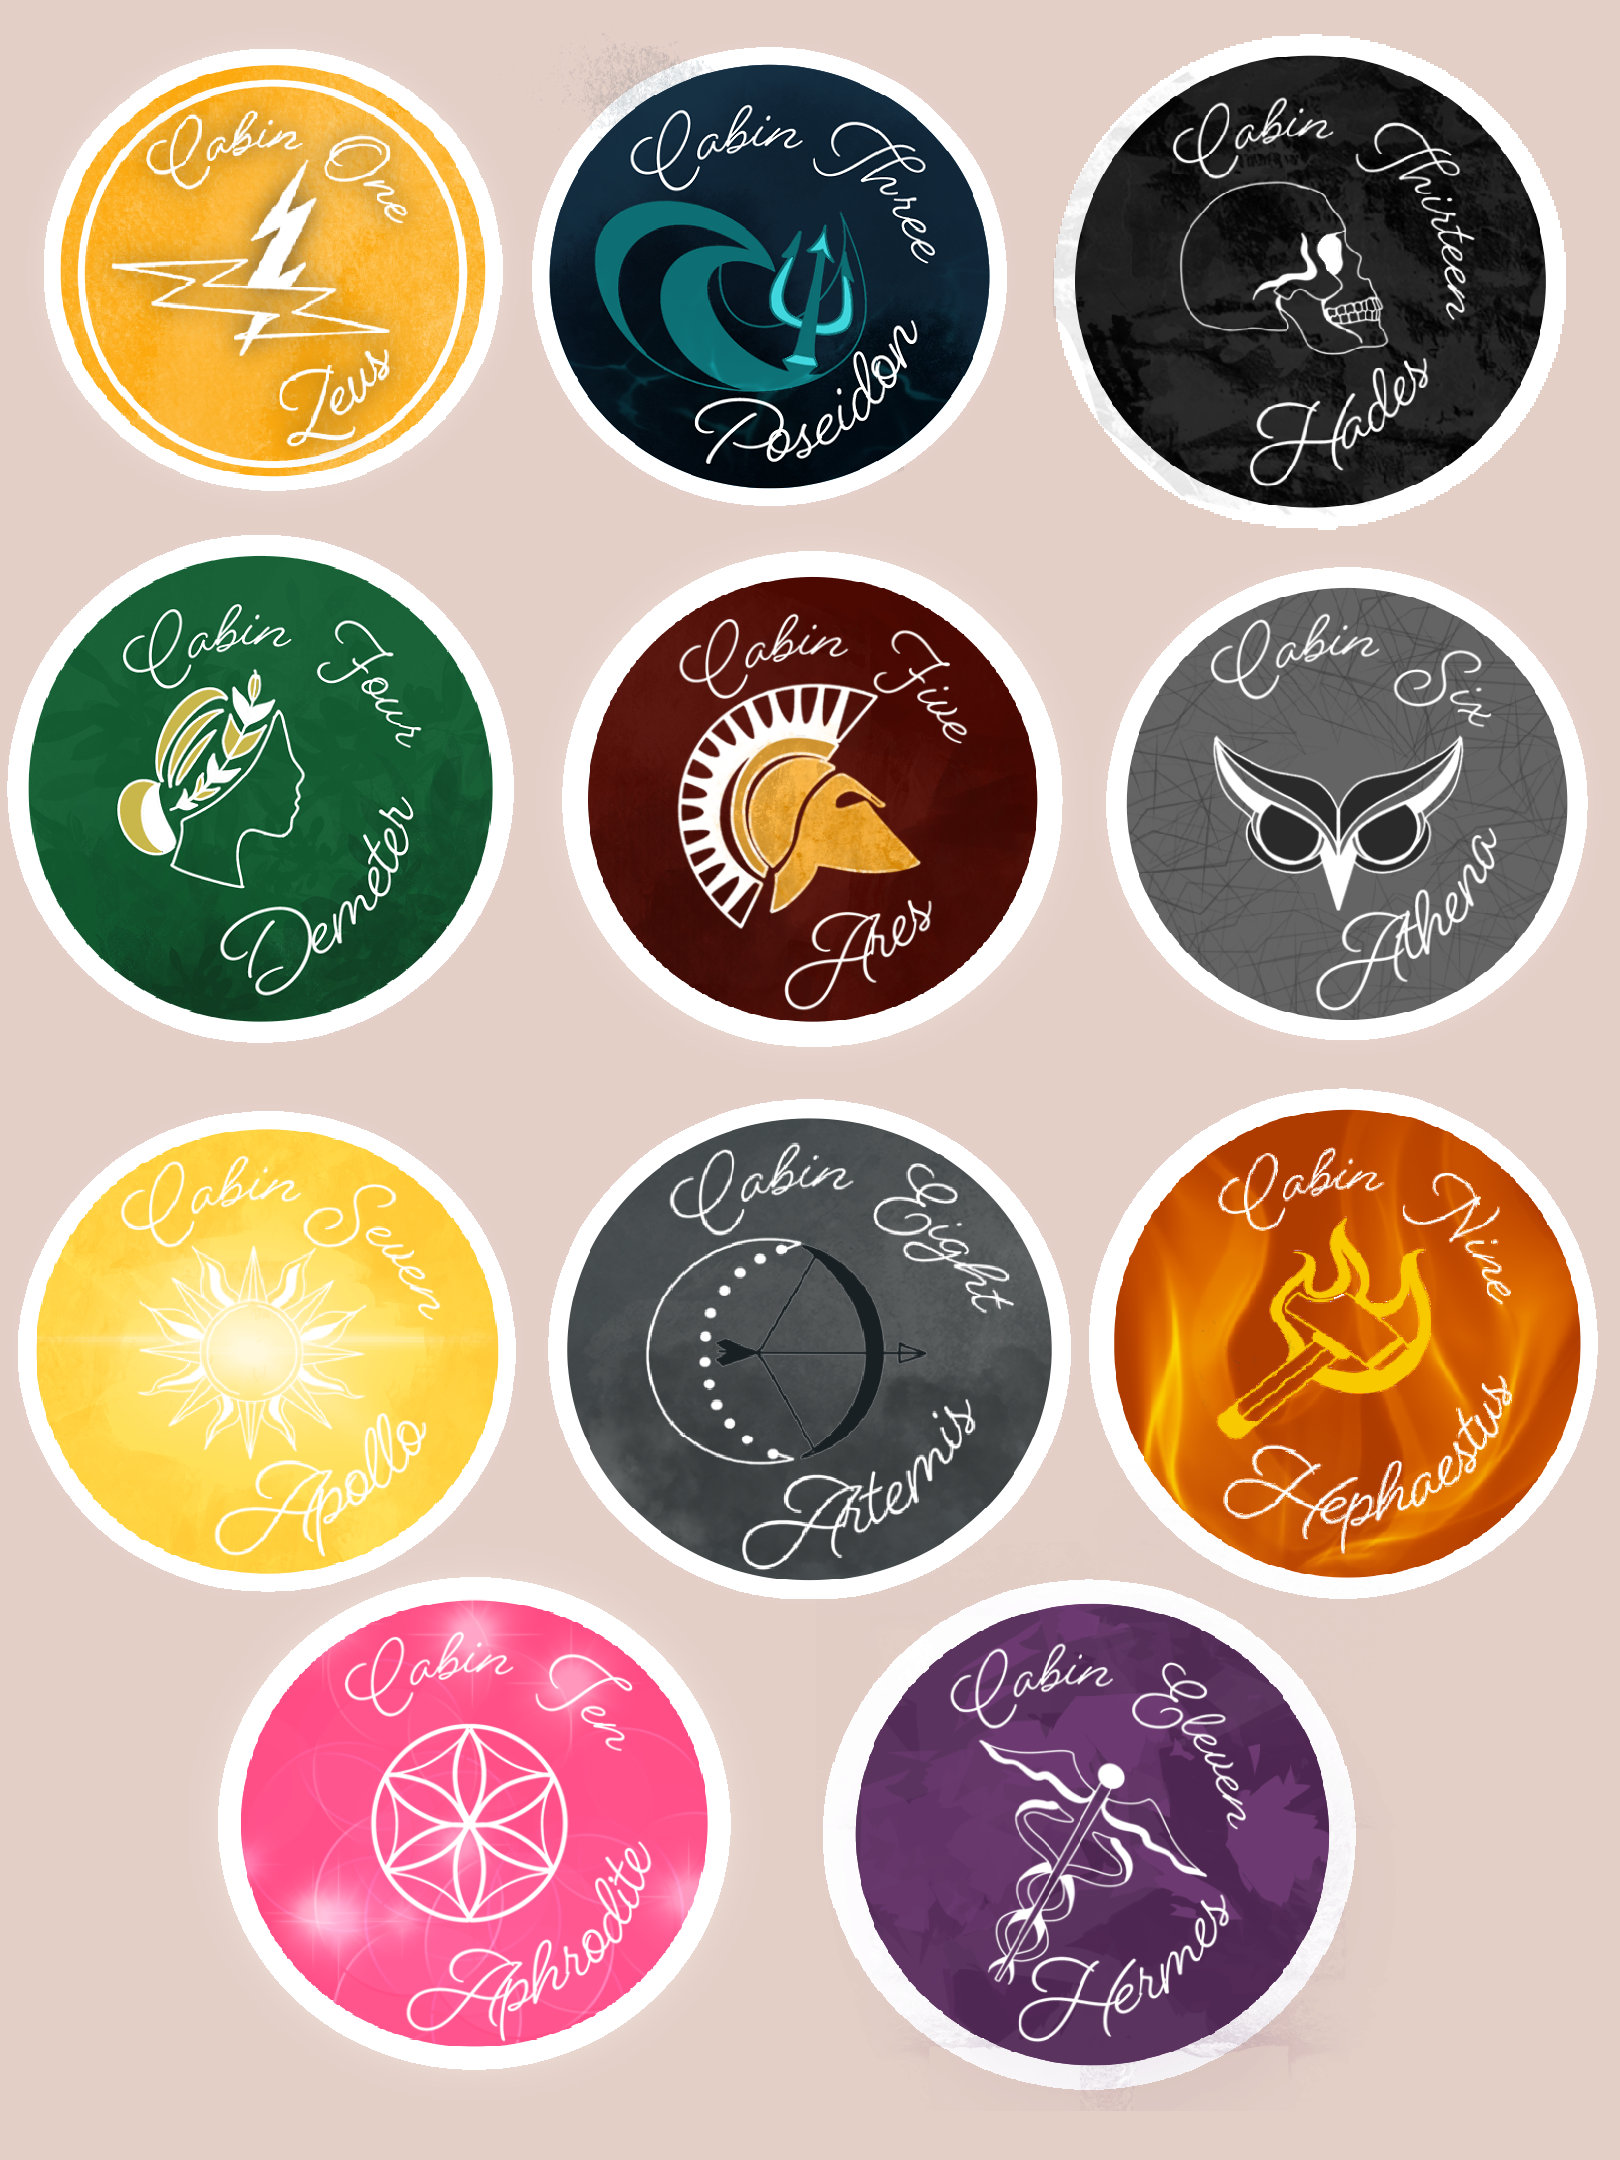 Which Percy Jackson Cabin Do You Belong In?